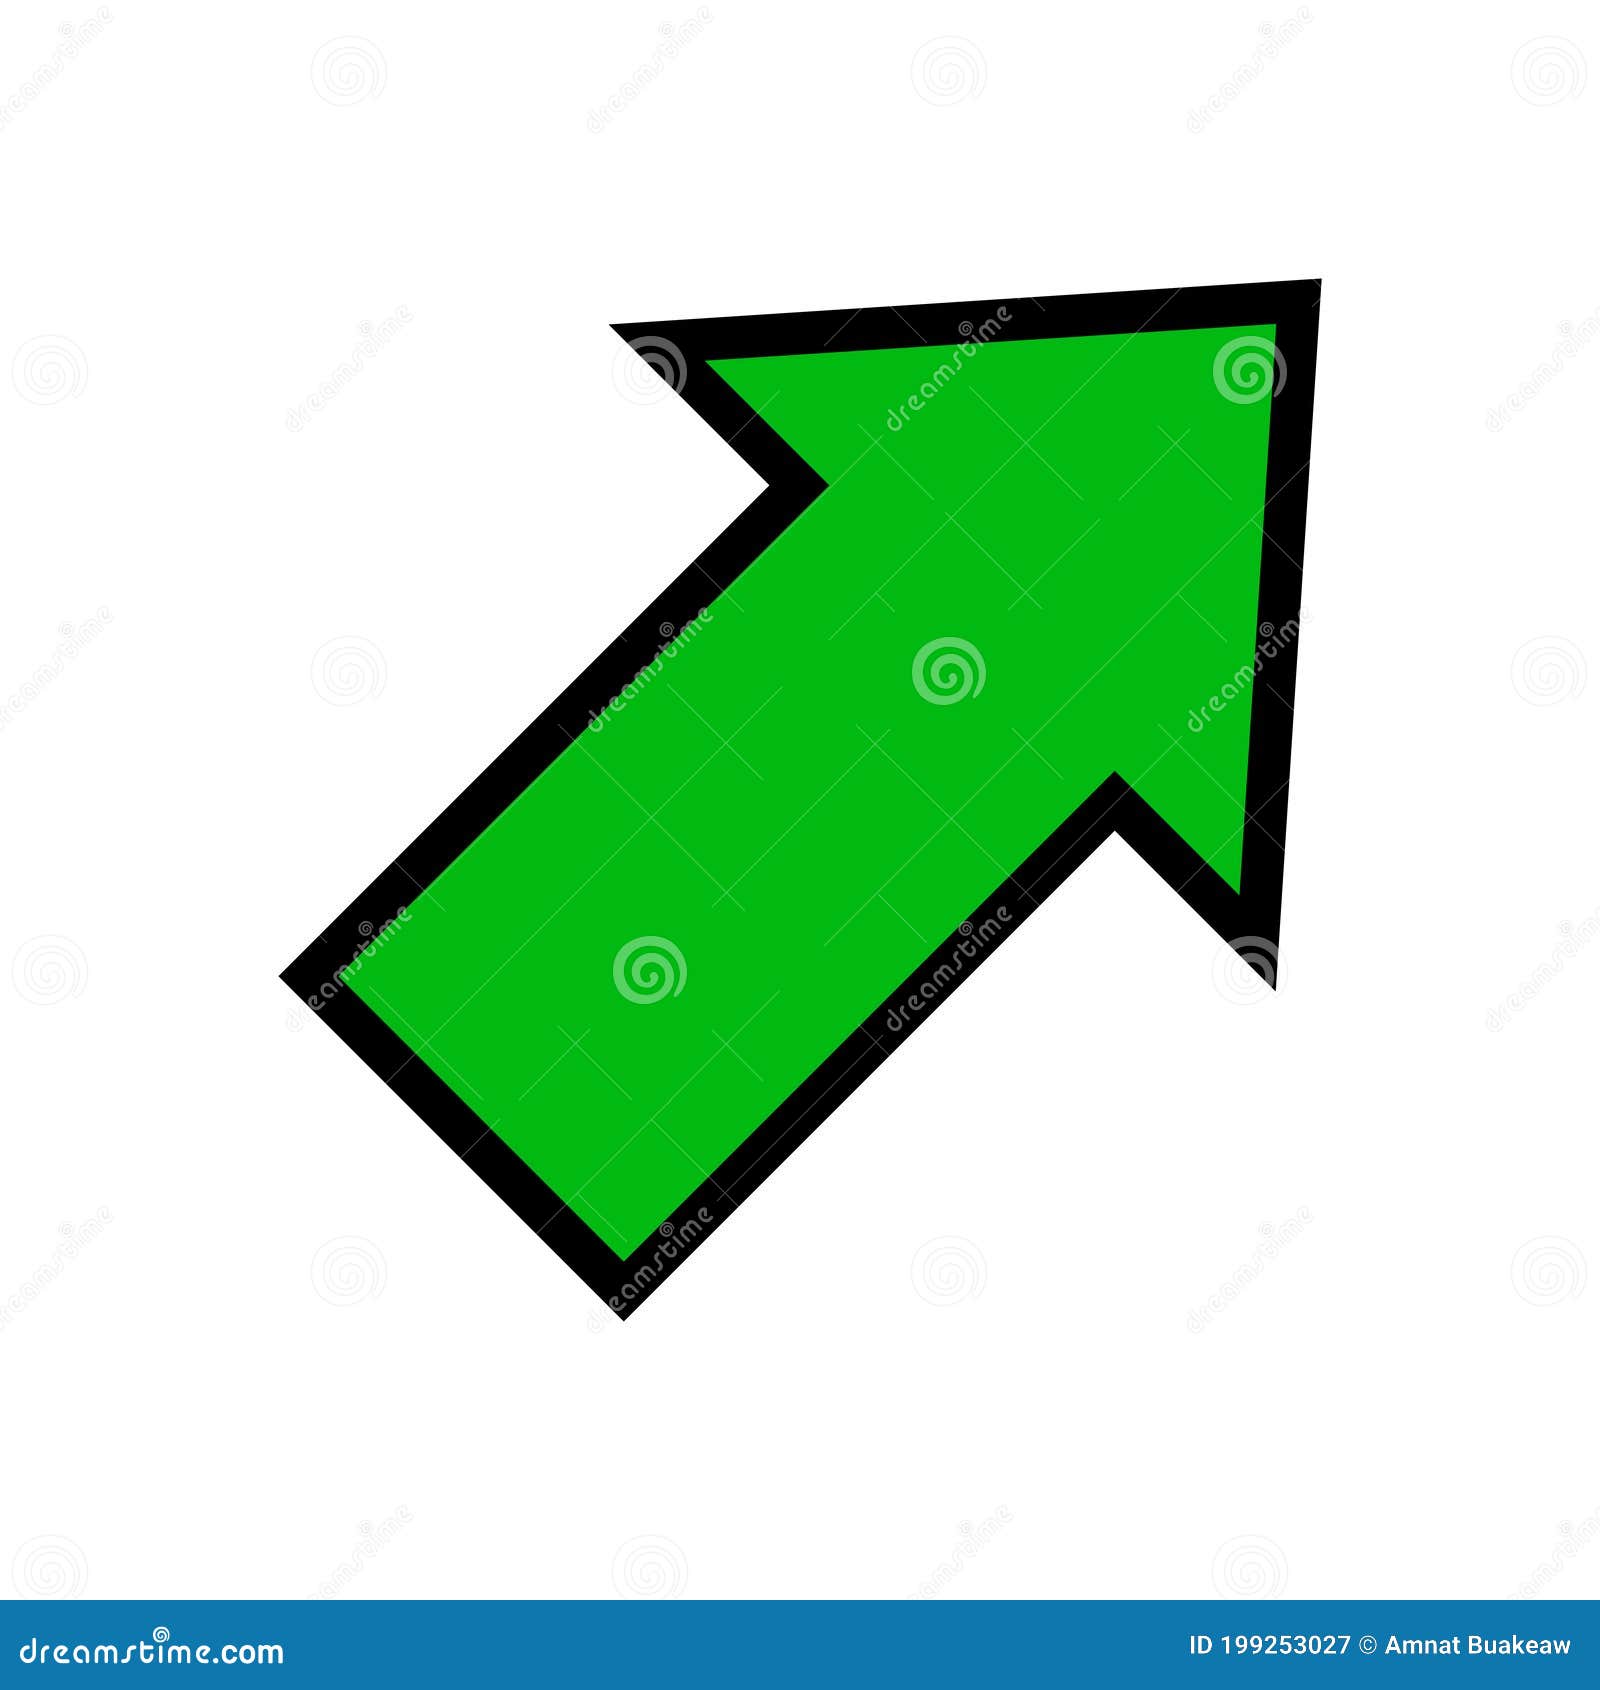 Single Green Arrow, Diagonal Arrow Sign Right Up Isolated on White ...